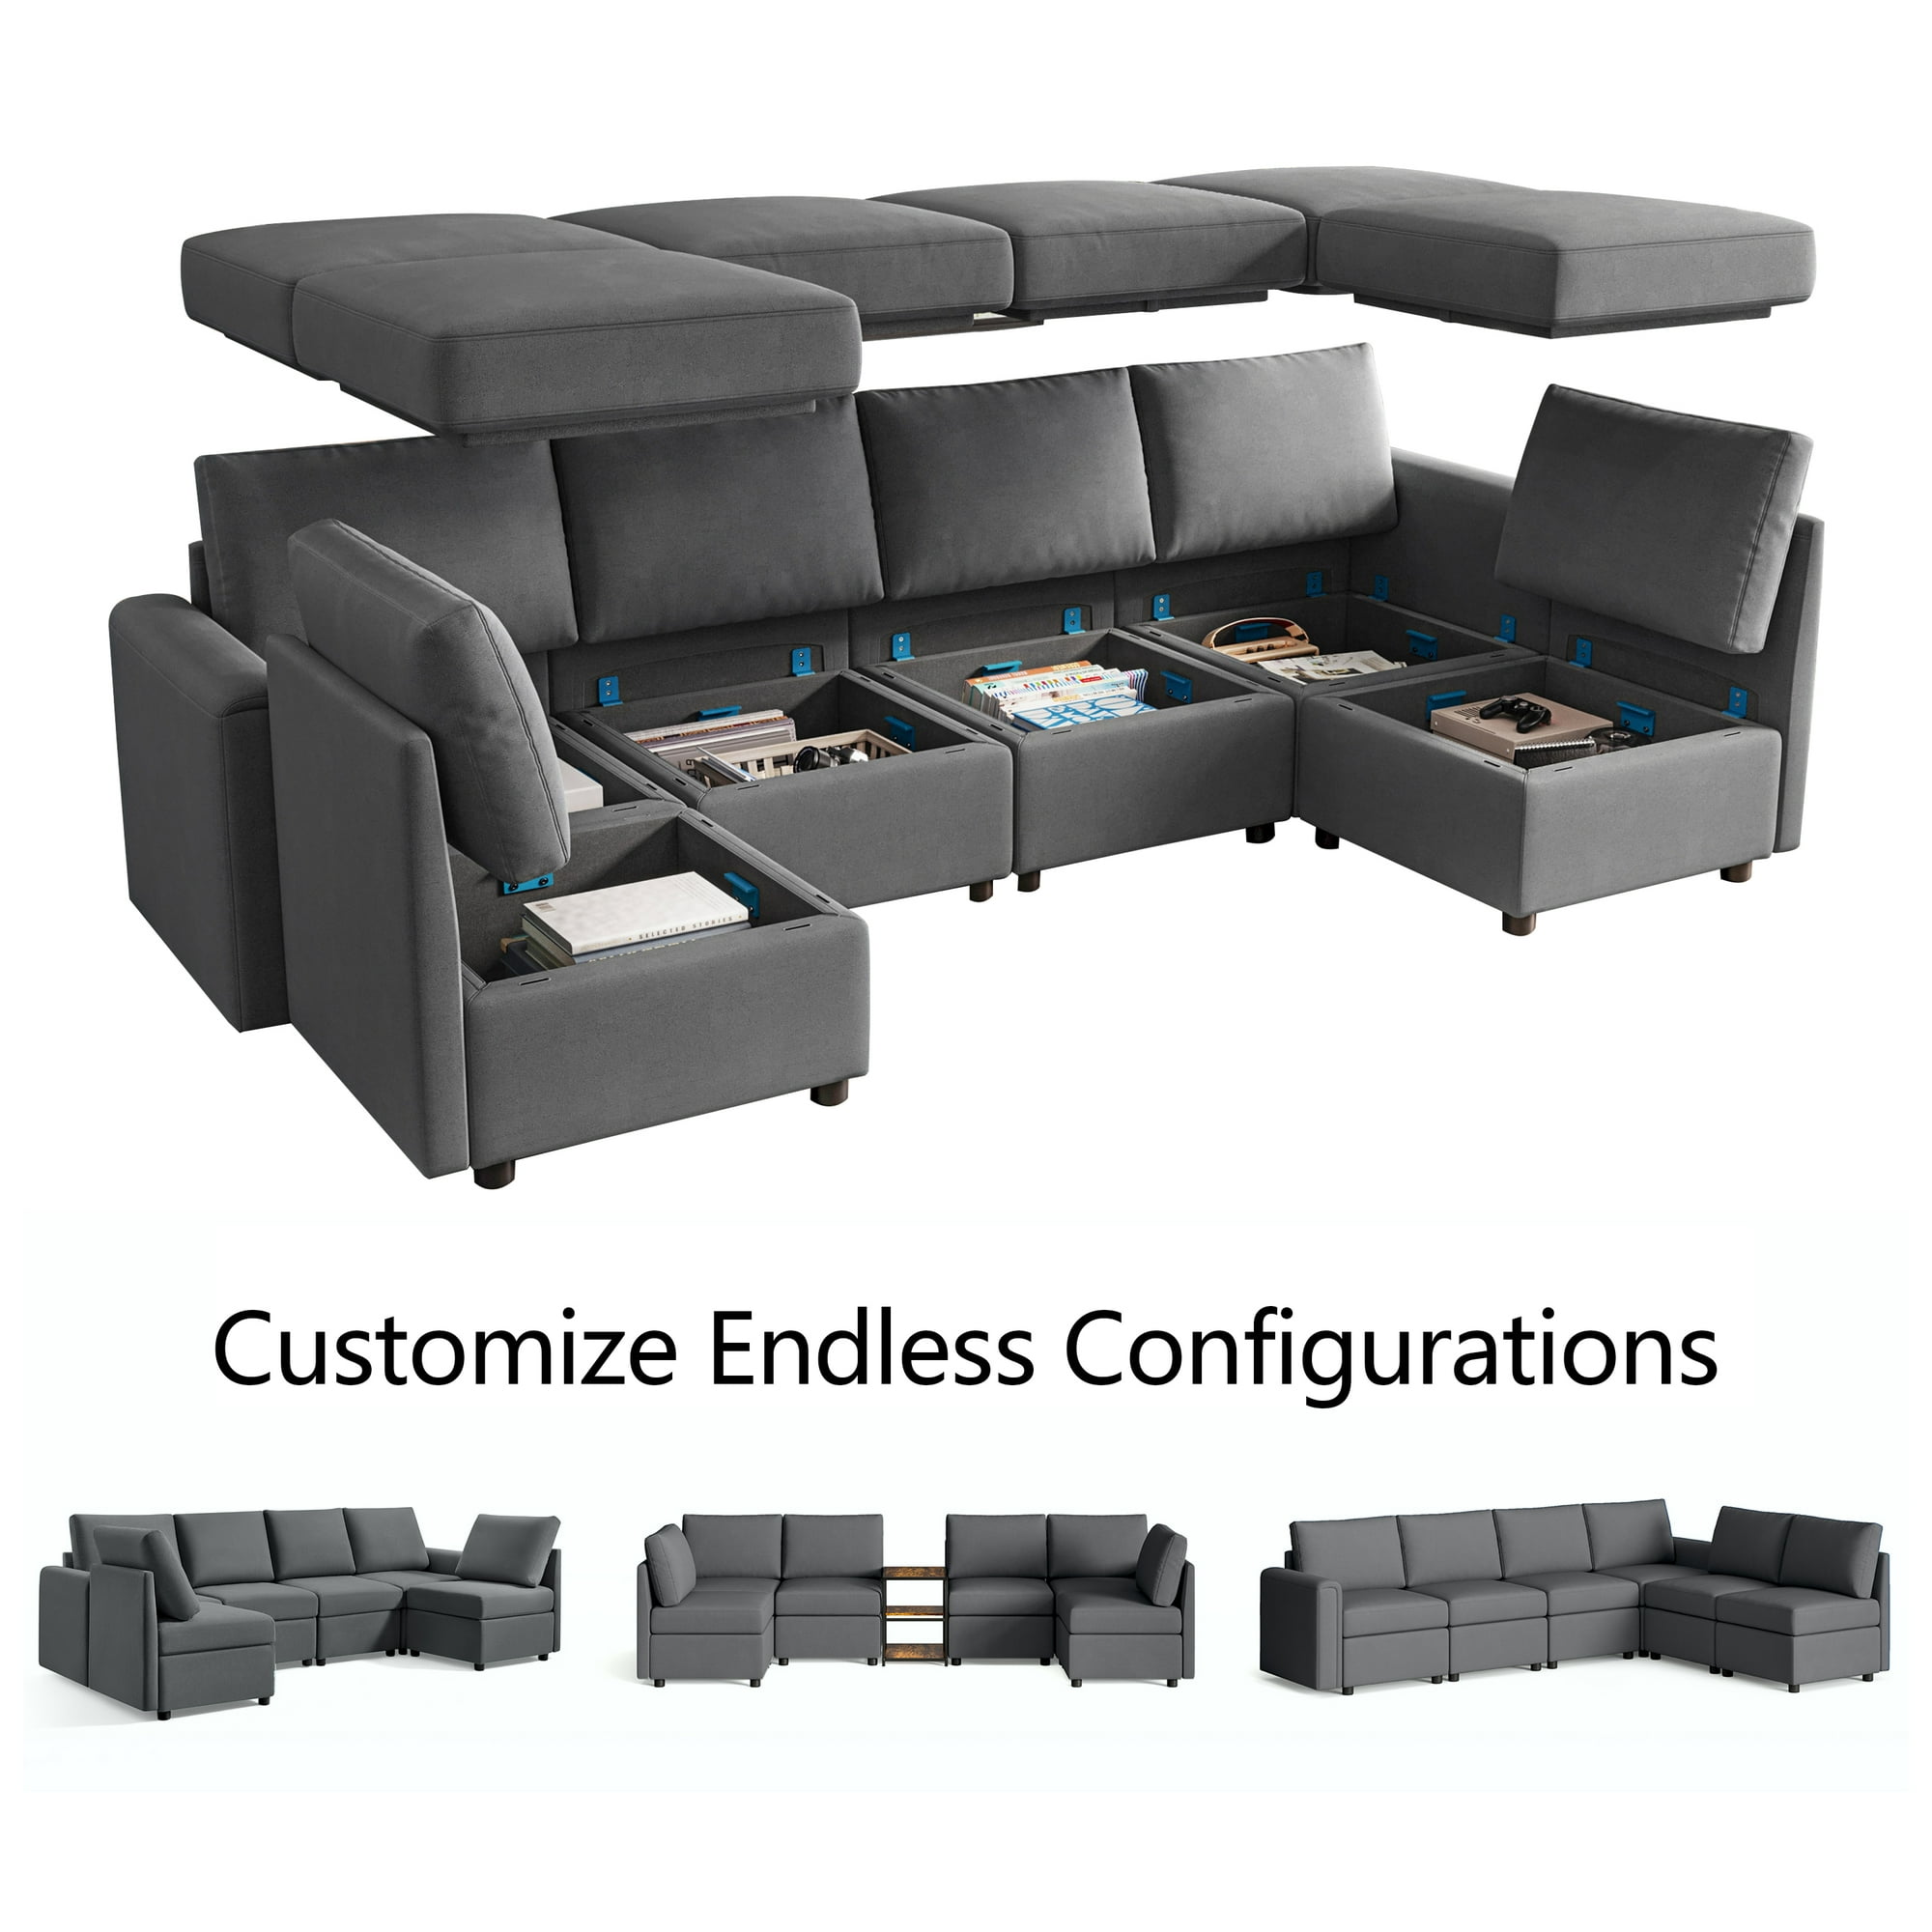 LINSY HOME Modular Couches and Sofas Sectional with Storage Sectional ...